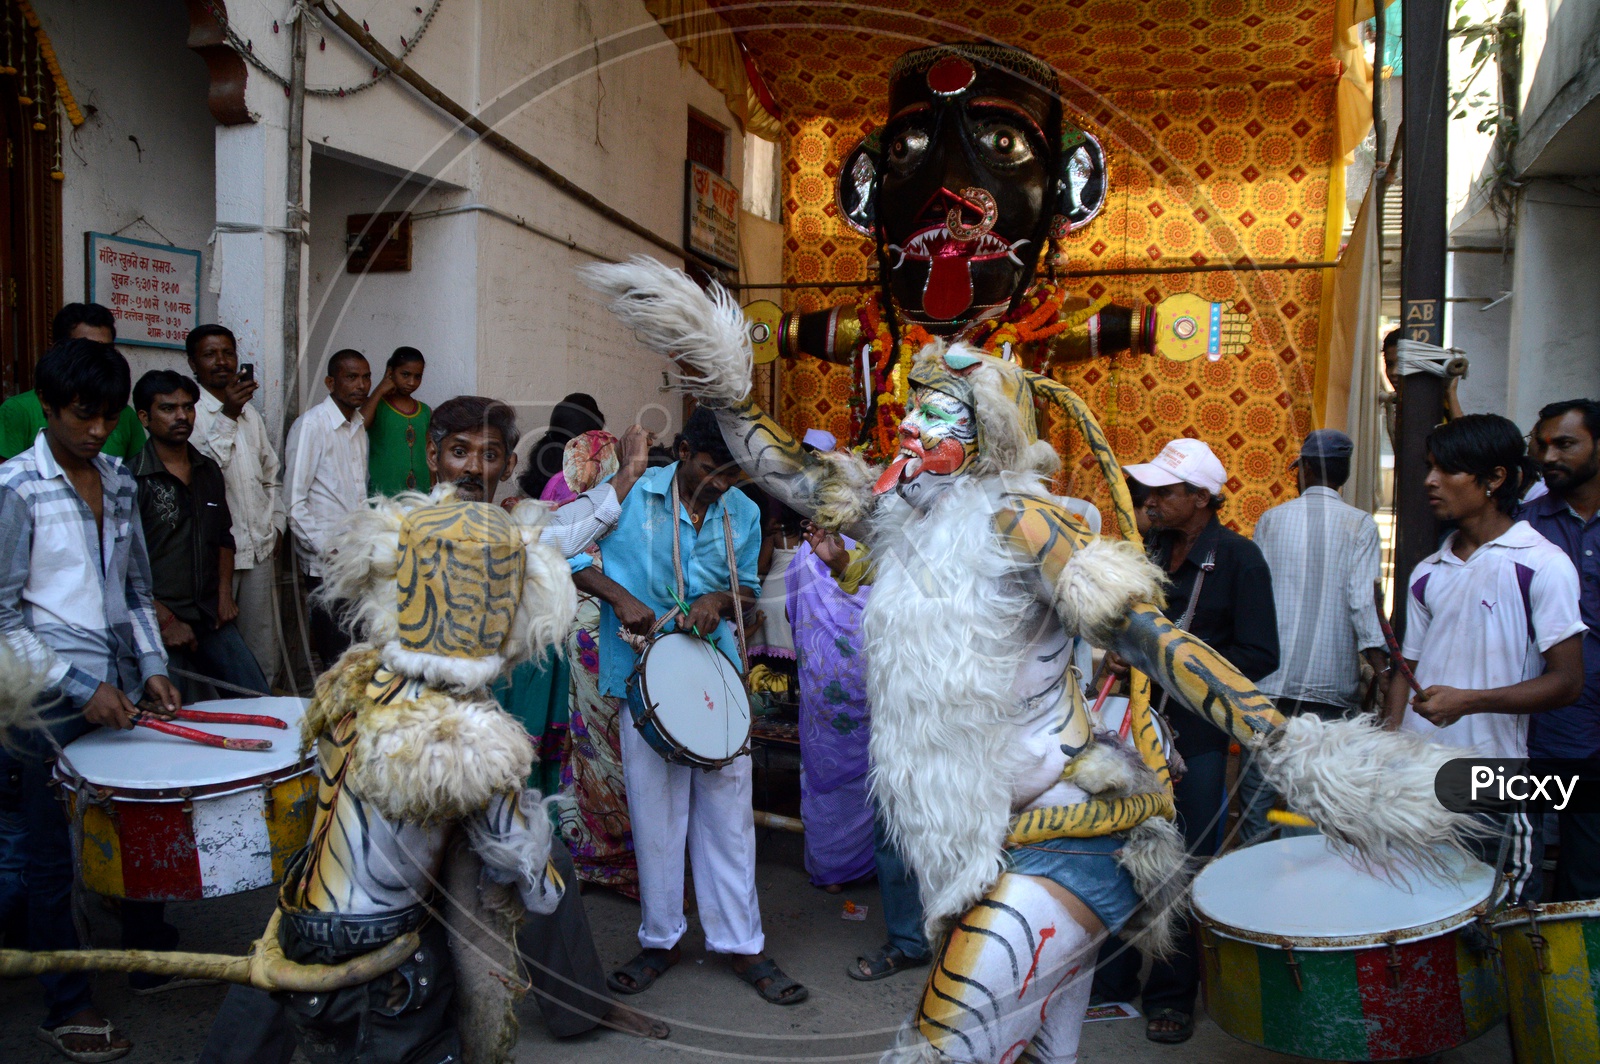 Nagpur Men Dressed Like Lions  In Marbat Procession  and Dancing On Streets of Nagpur